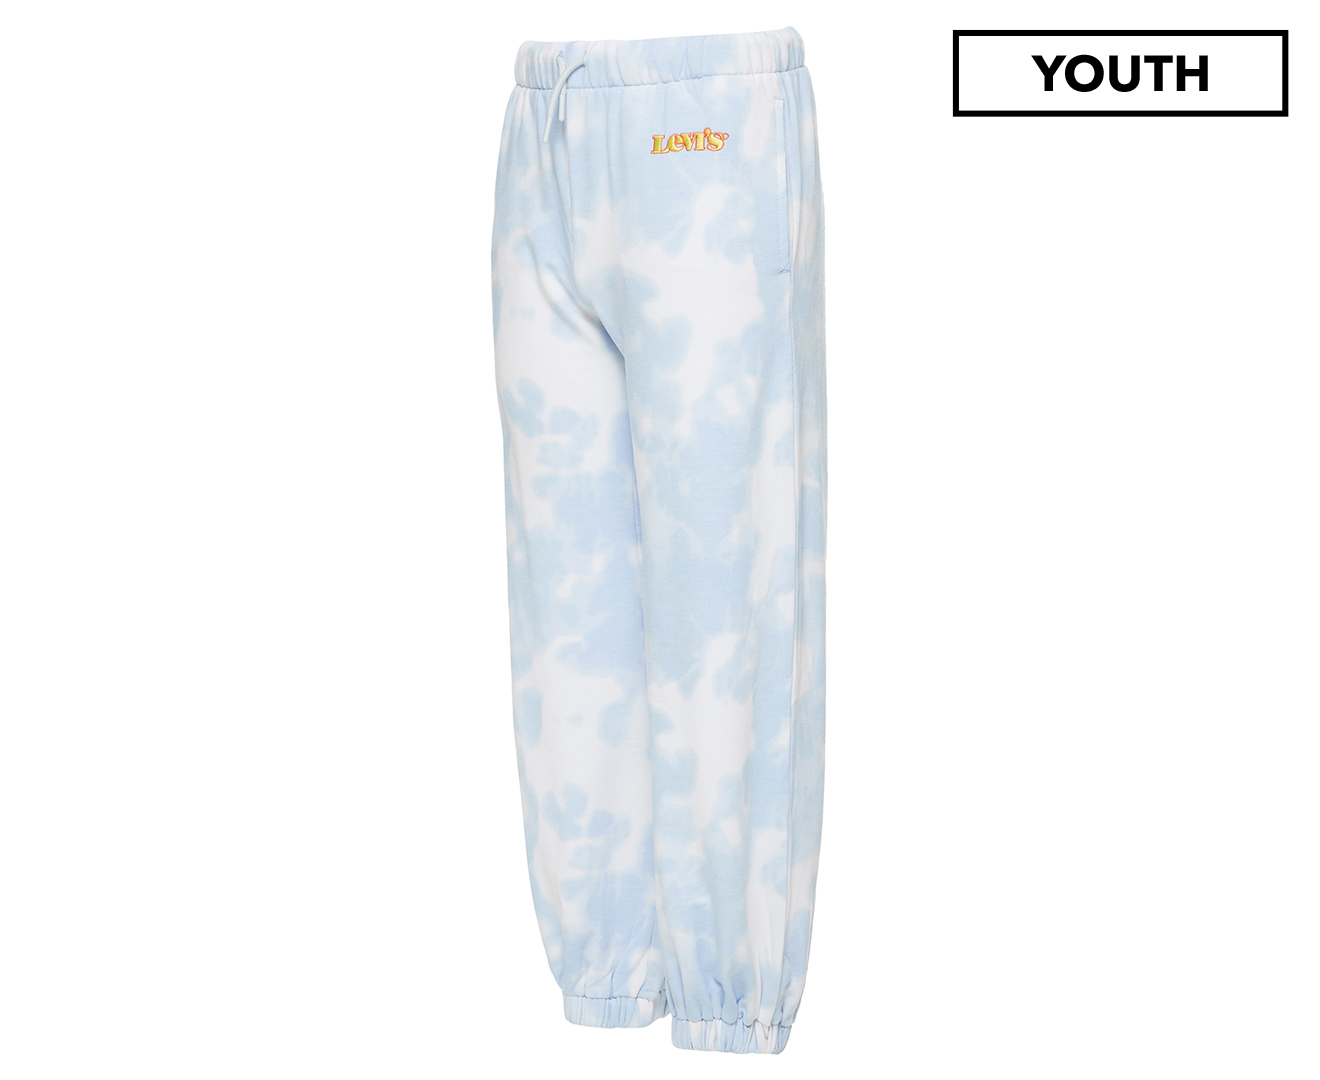 Levi's Youth Girls' Benchwarmer Joggers / Tracksuit Pants - Plein Air |  